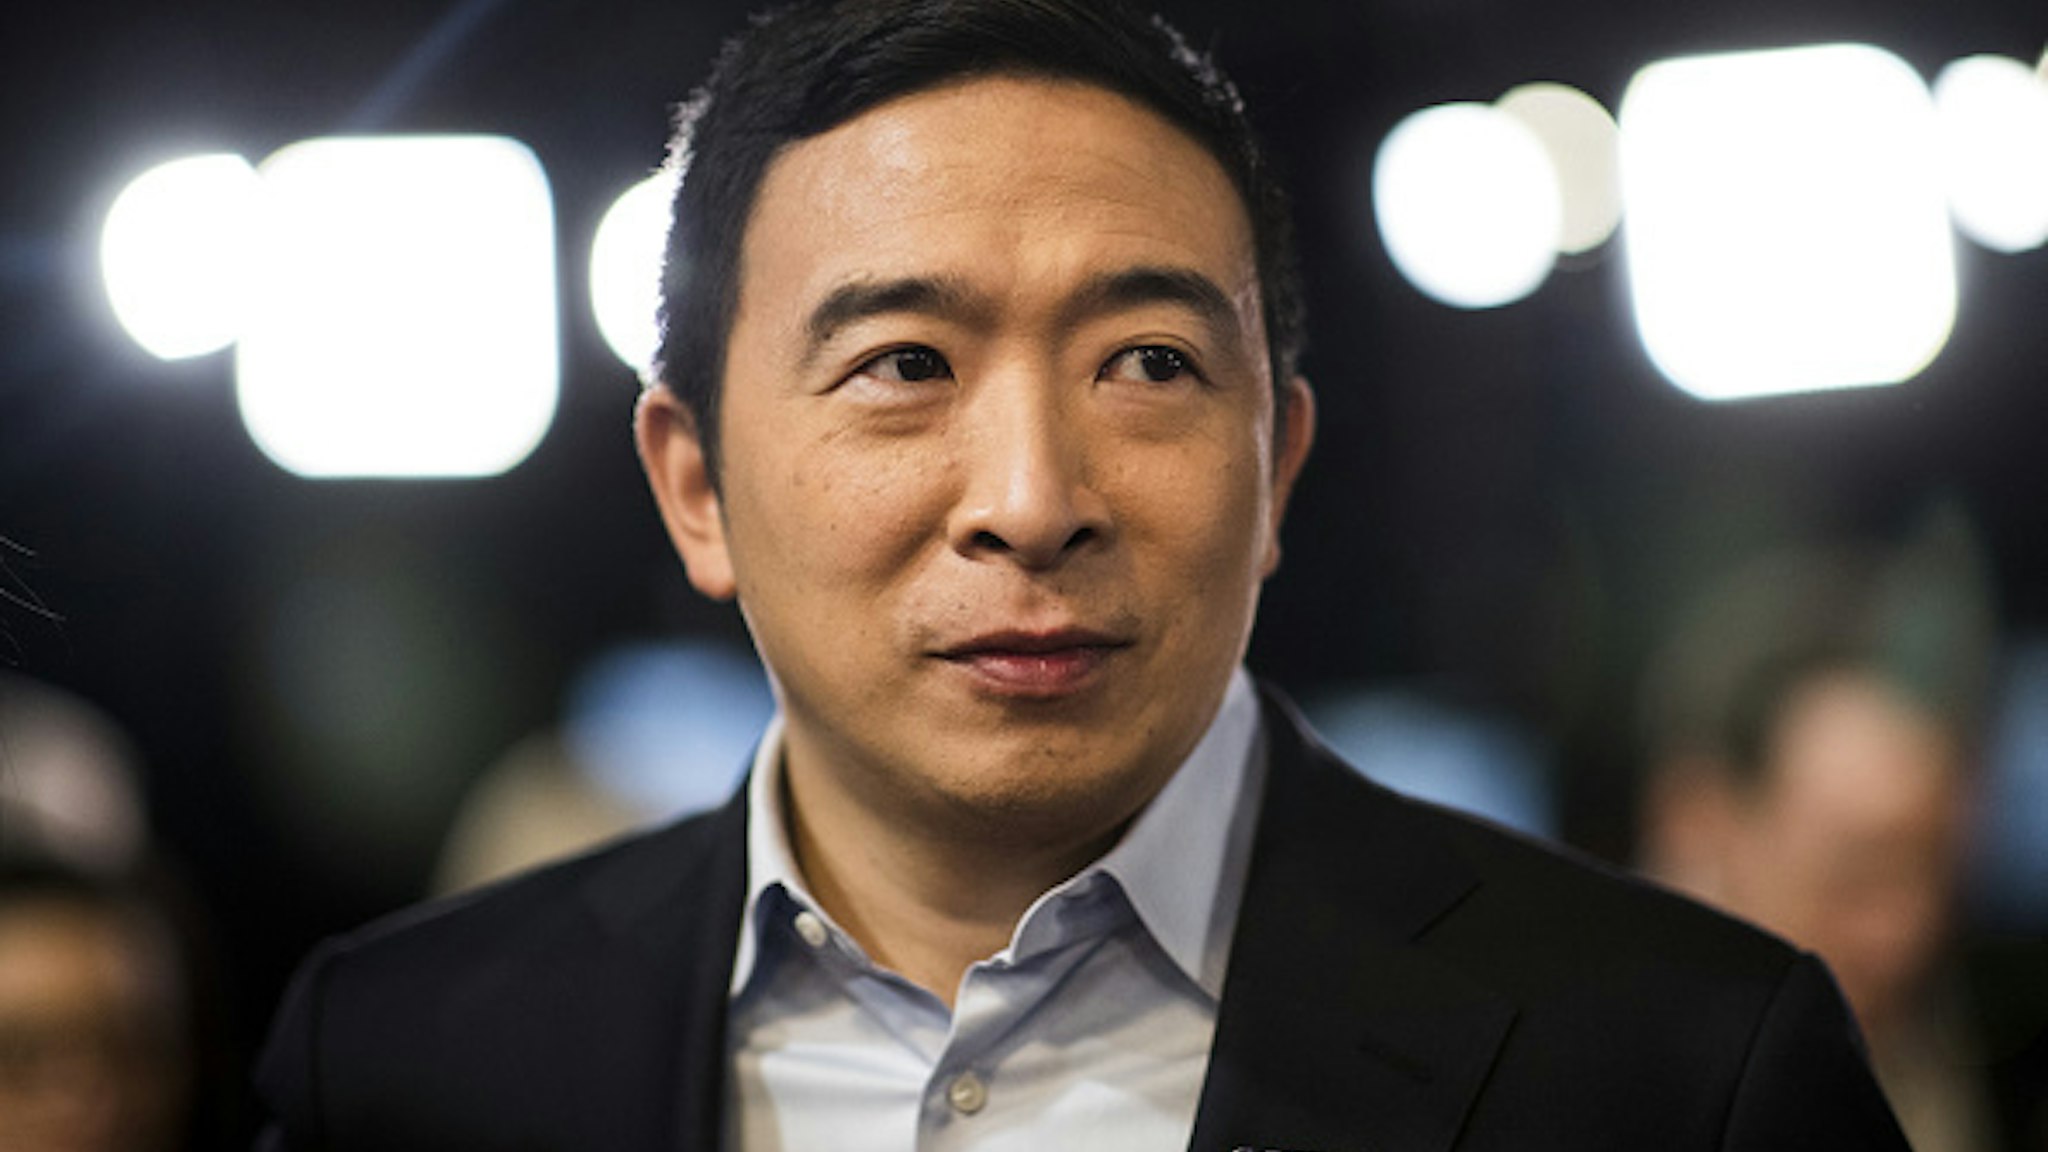 Andrew Yang, founder of Venture for America and 2020 Democratic presidential candidate, stands in the spin room following the Democratic presidential debate at Saint Anselm College in Manchester, New Hampshire, U.S., on Friday, Feb. 7, 2020. The New Hampshire debates often mark a turning point in a presidential campaign, as the field of candidates is winnowed and voters begin to pay closer attention.